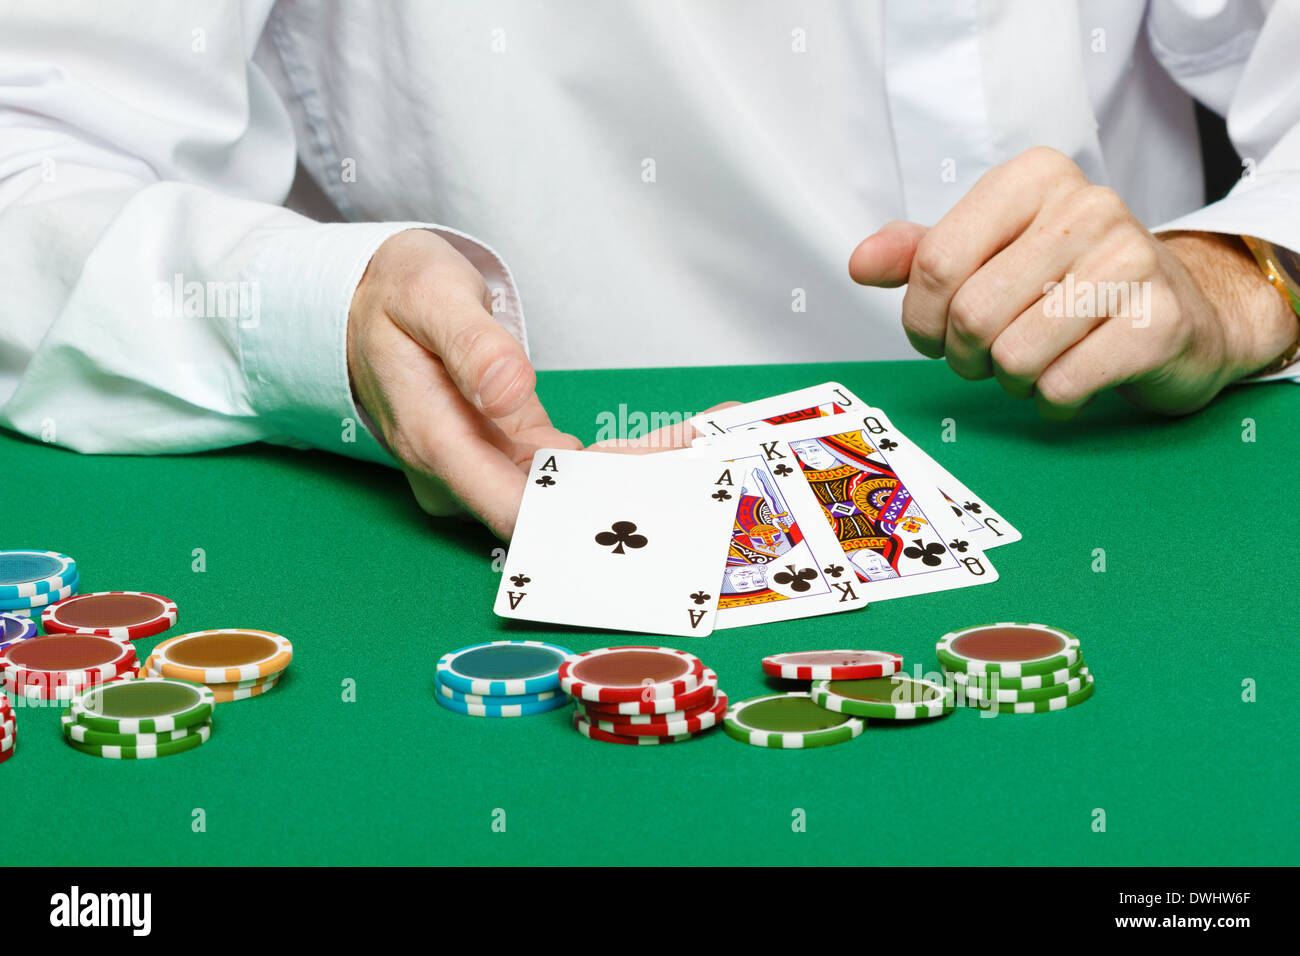 gambler. Male hand with cards and chips on green table Stock Photo